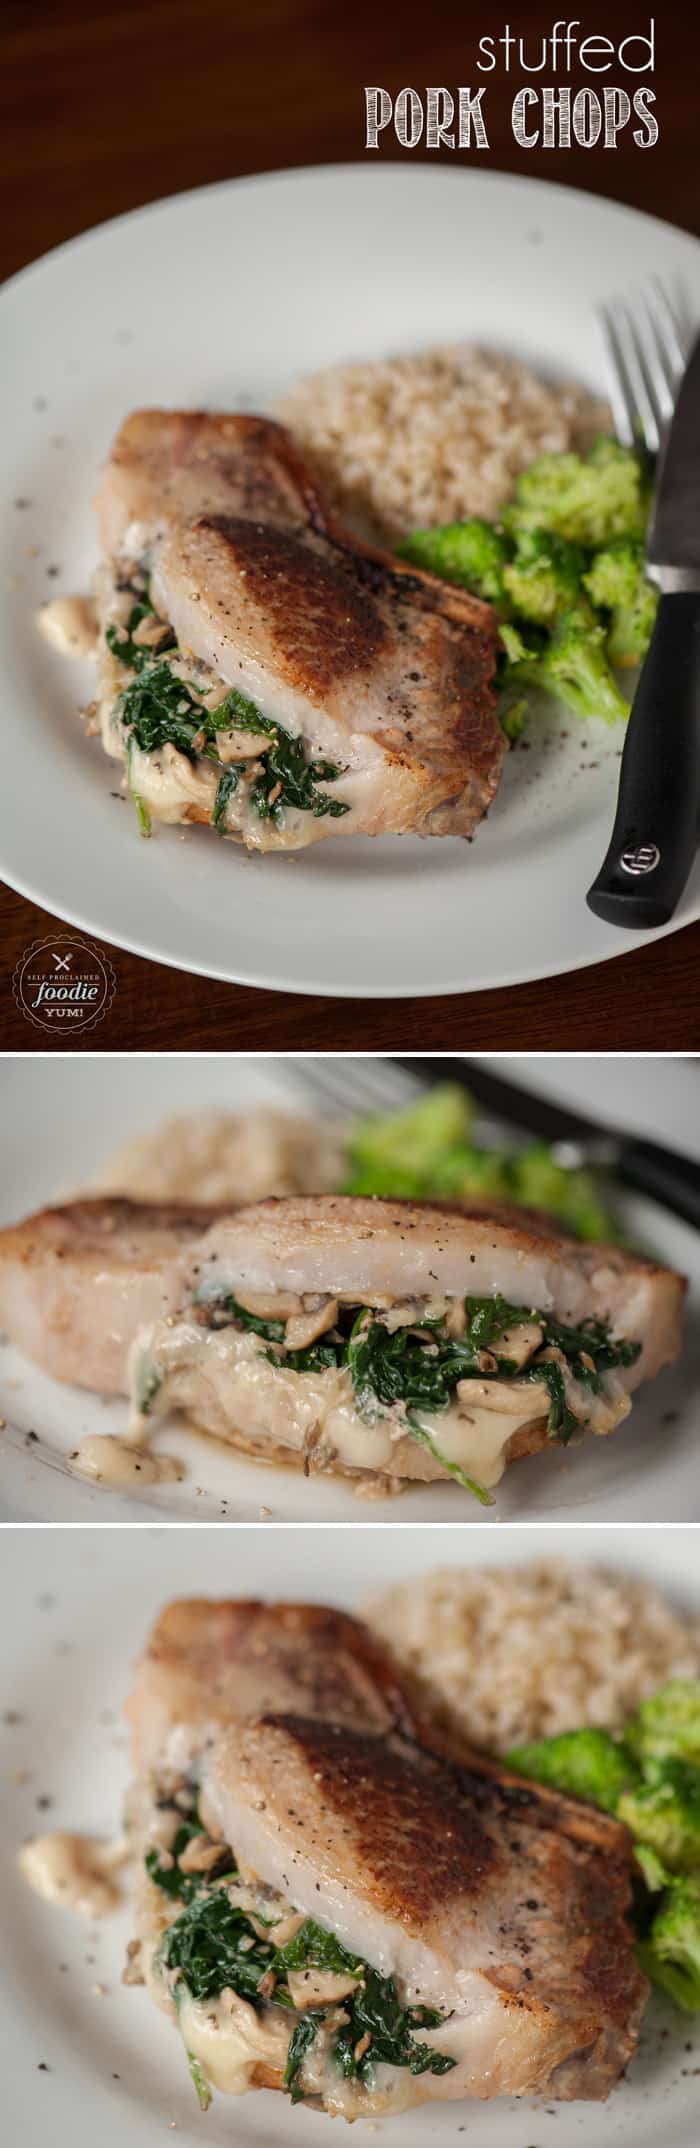 Stuffed Pork Chops with bone in pork chops, spinach, mushrooms, and provolone make for a moist and delicious weeknight family dinner.